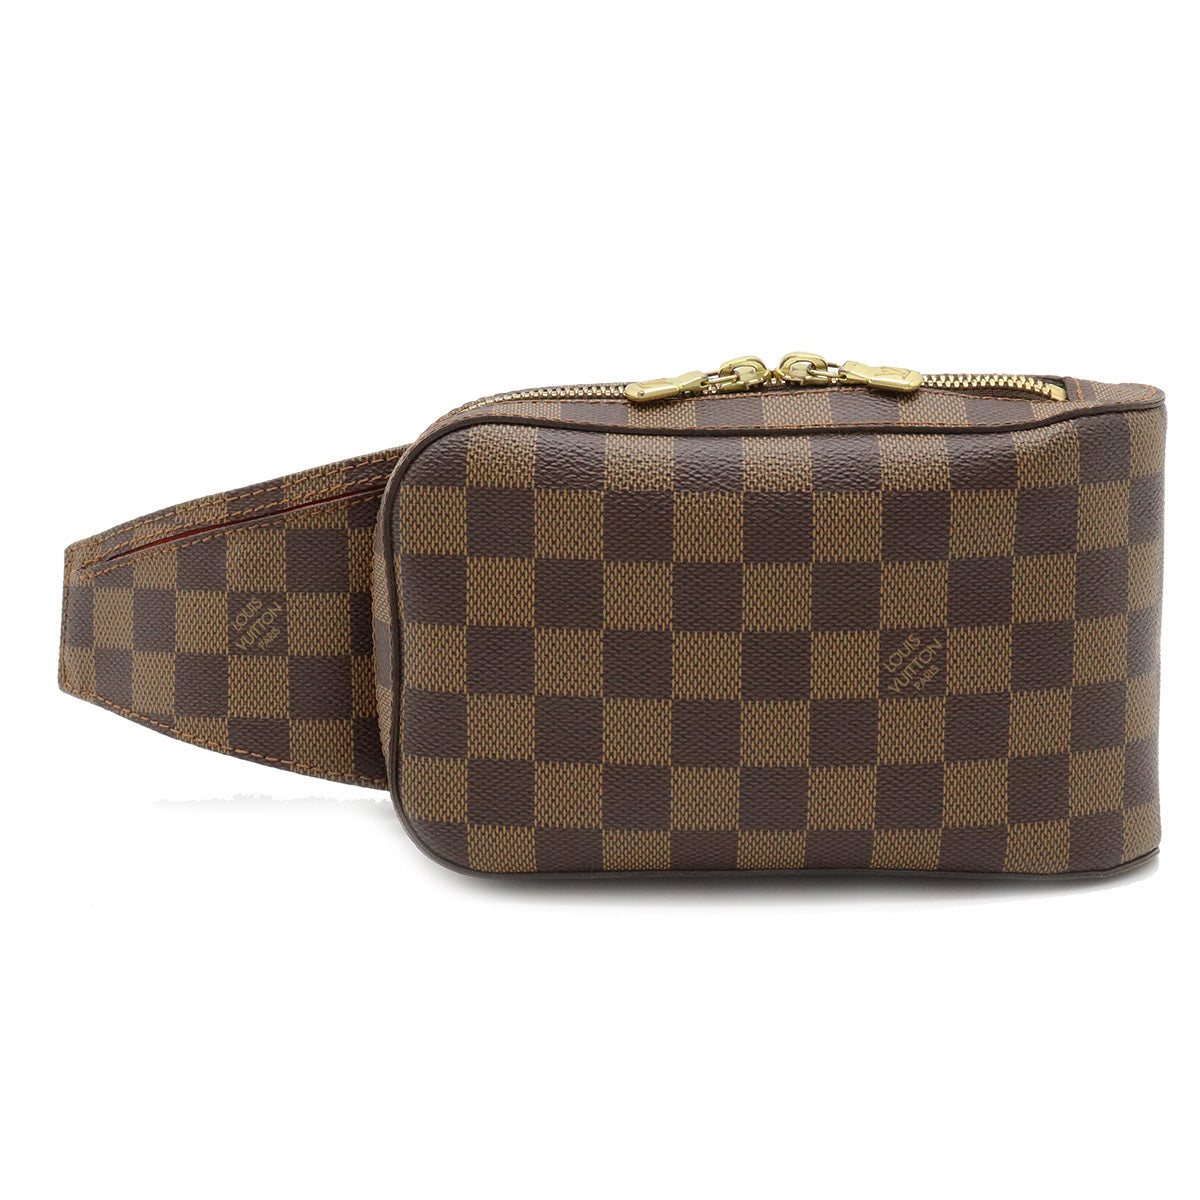 Louis Vuitton Leather Belt Bags & Fanny Packs for Women, Authenticity  Guaranteed